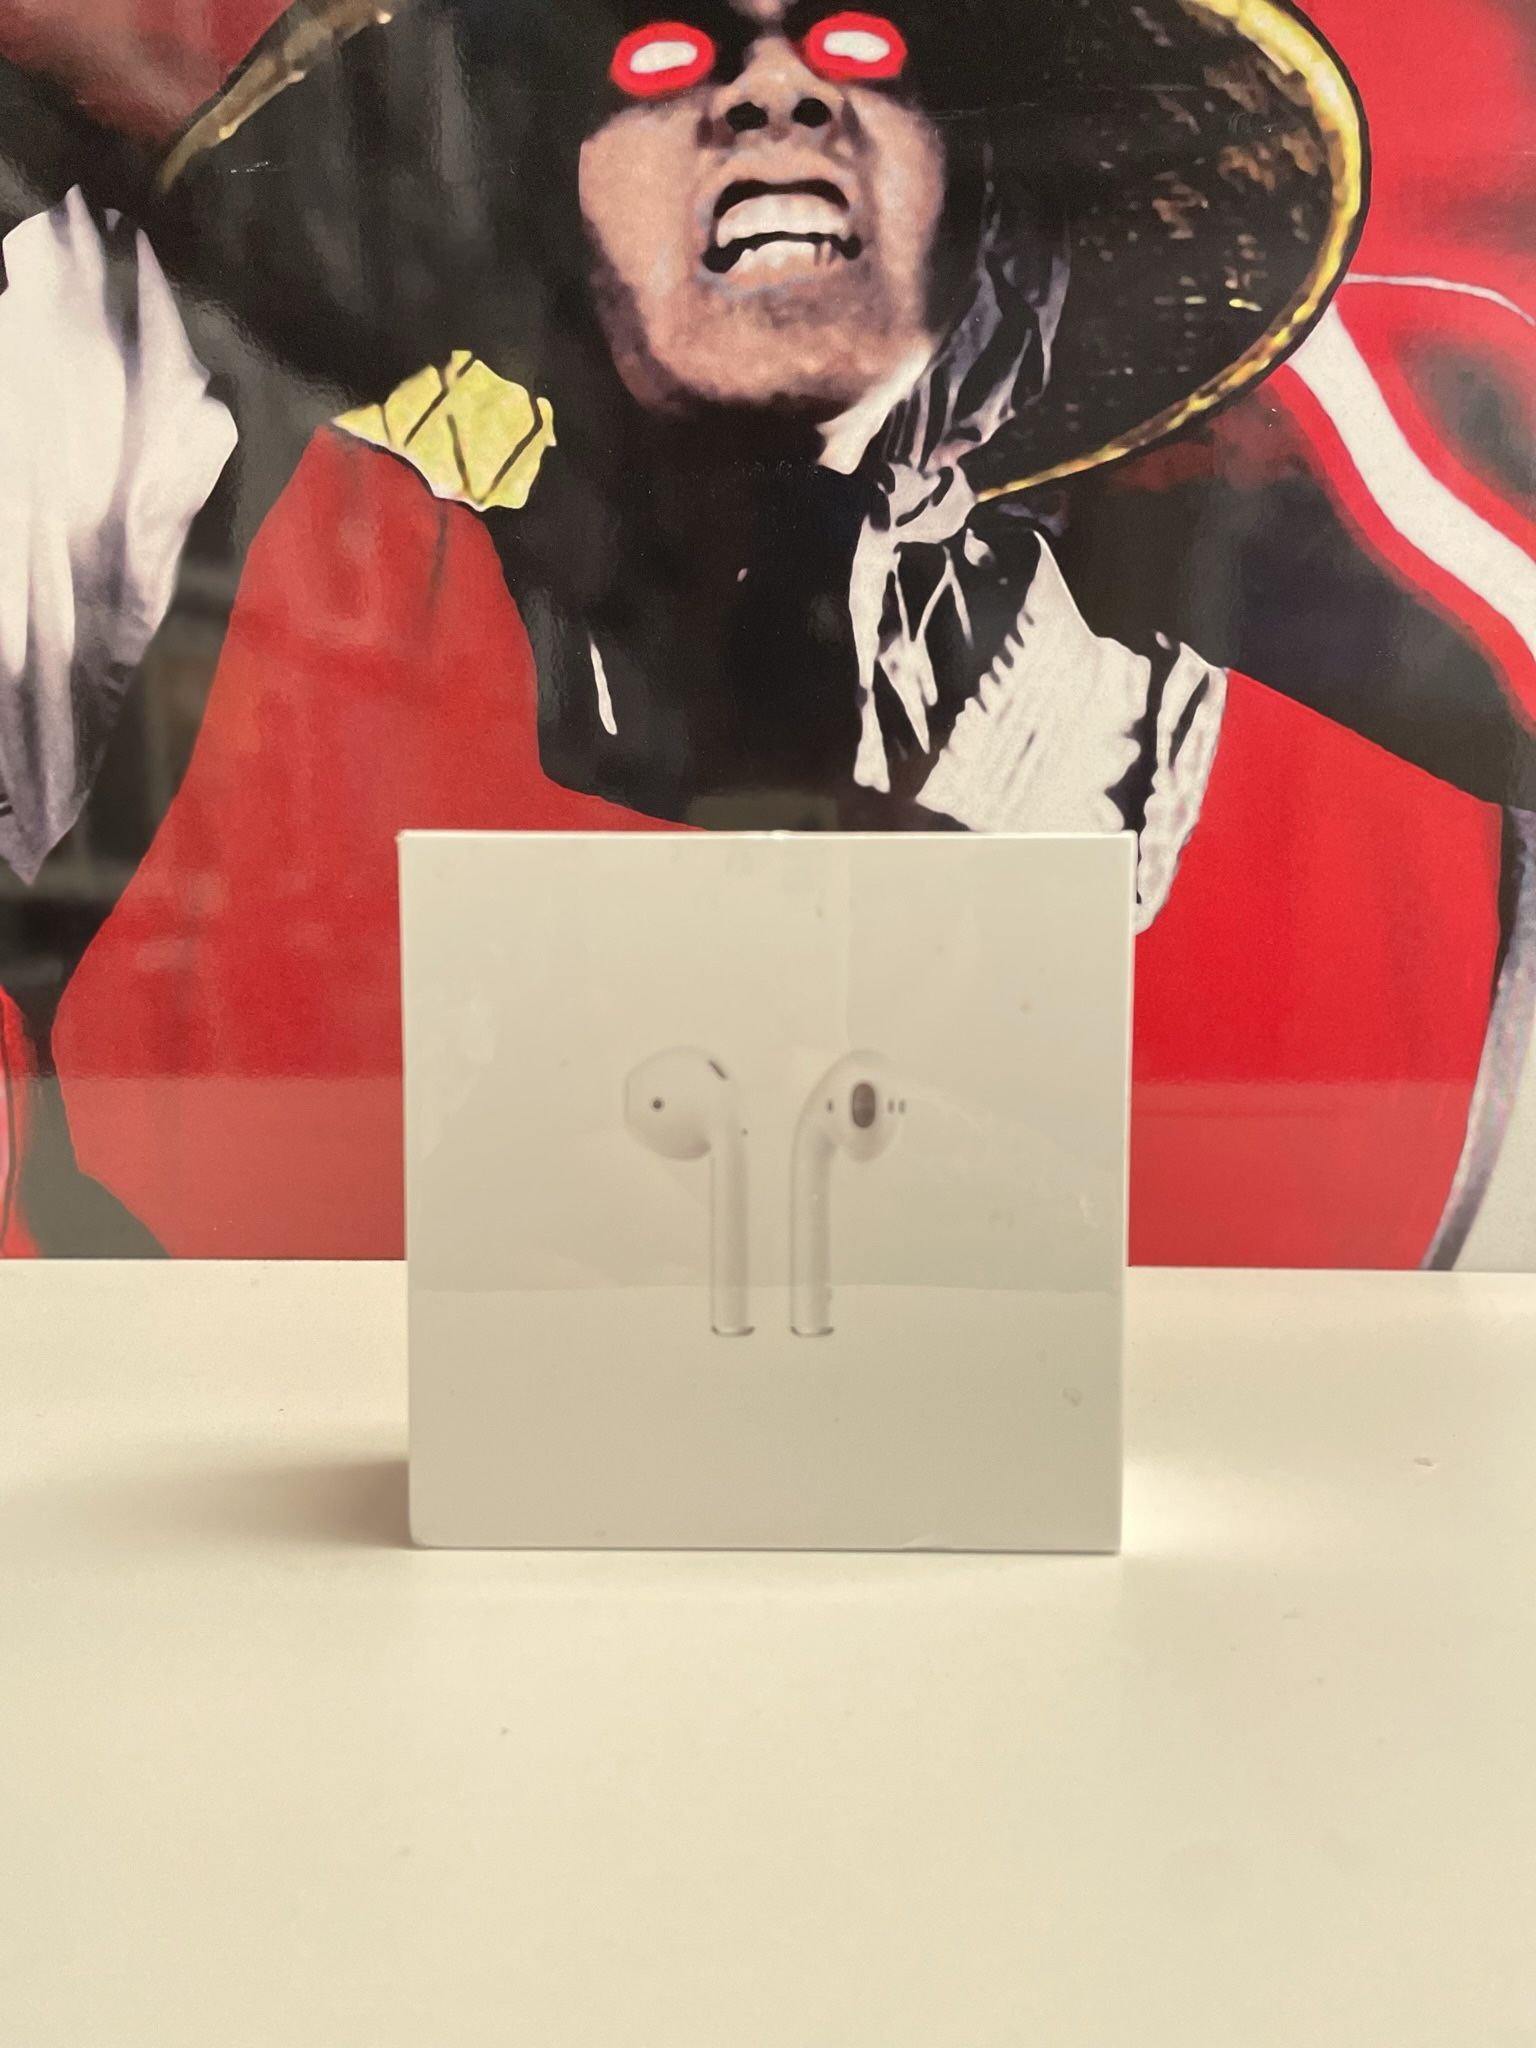 Apple AirPods (New)